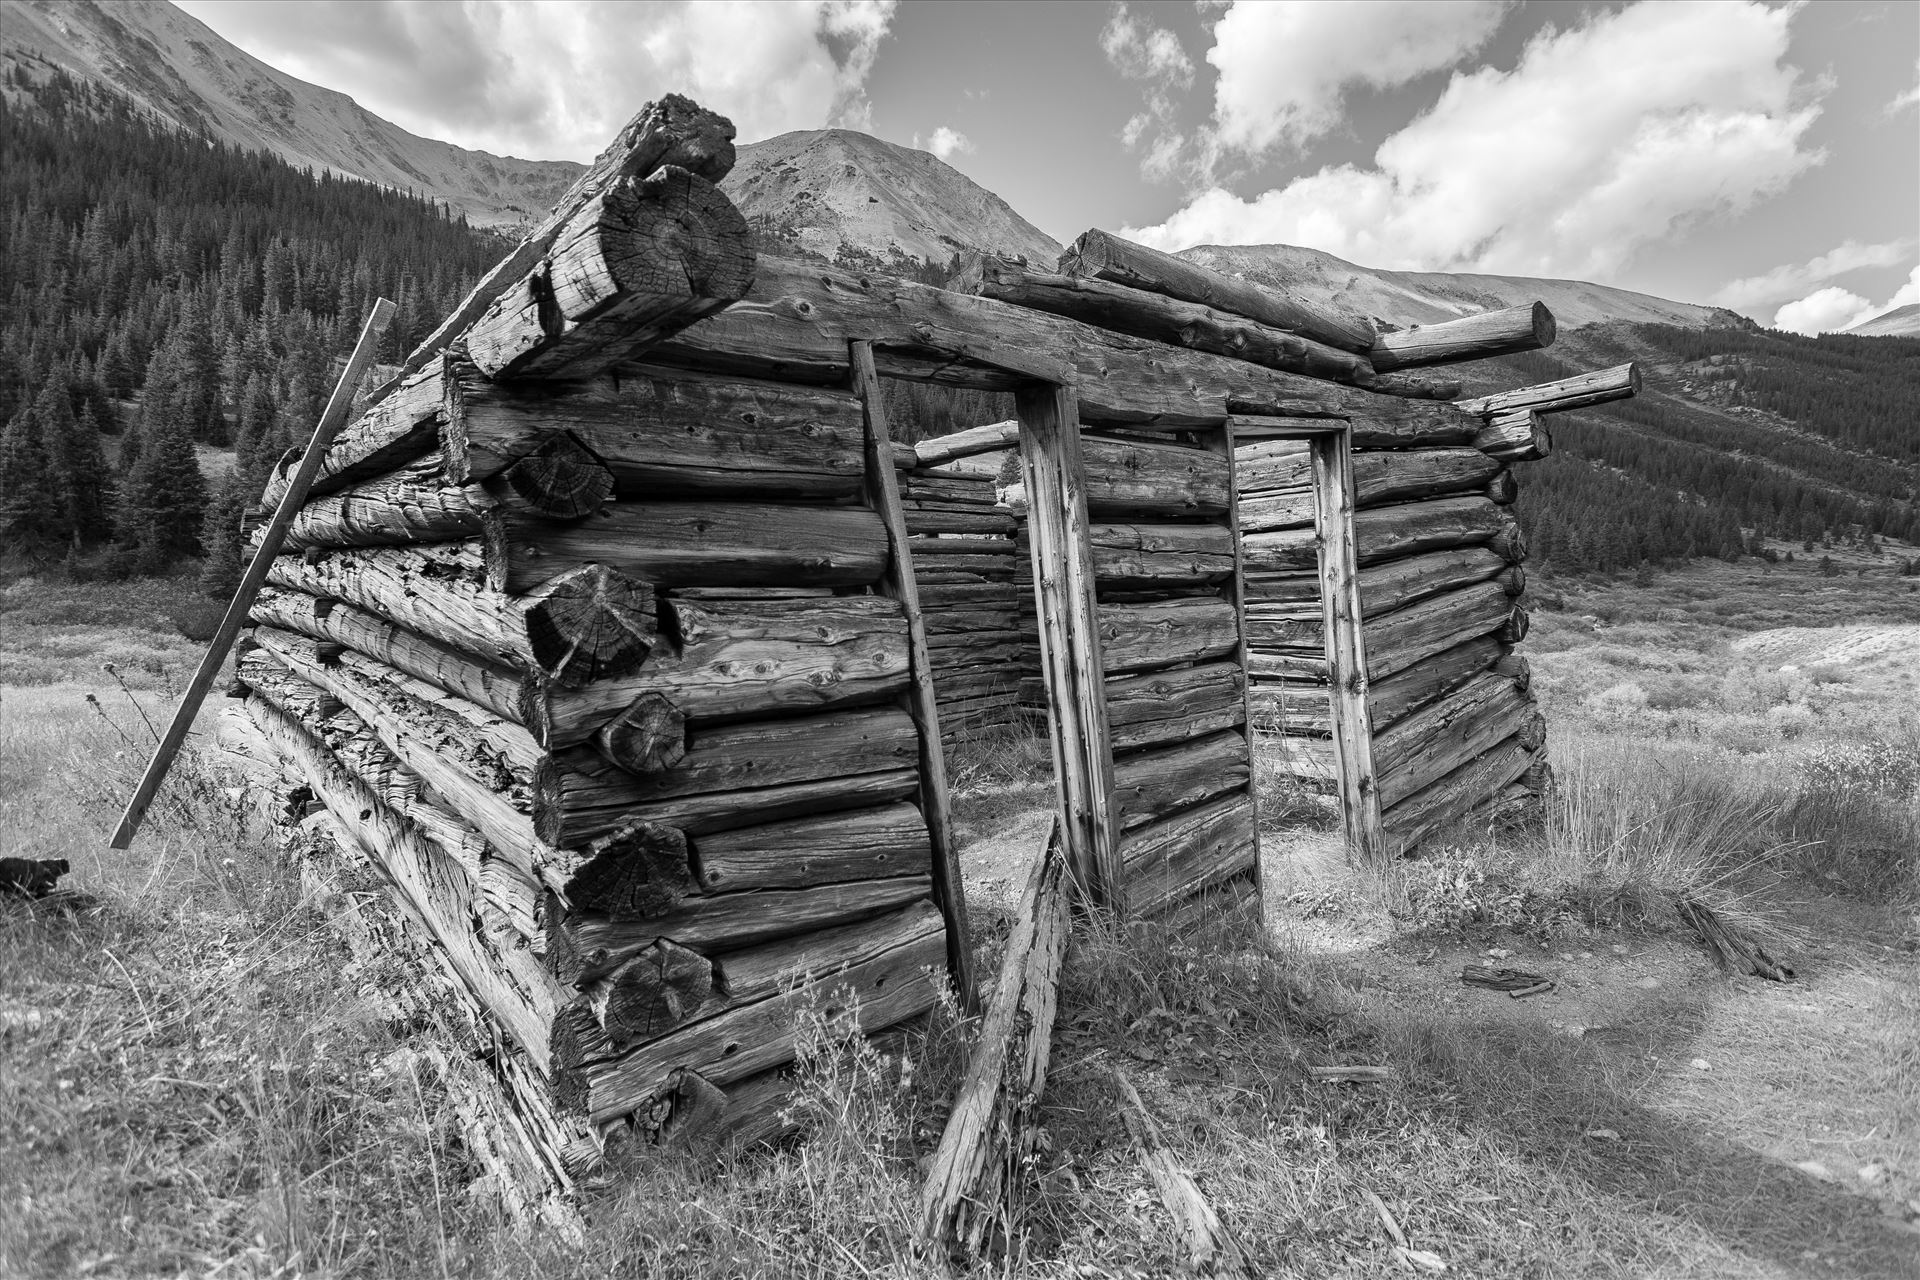 Ghosts of Independence Pass - A collapsing cabin in the ghost town of Independence, Colorado. by Scott Smith Photos